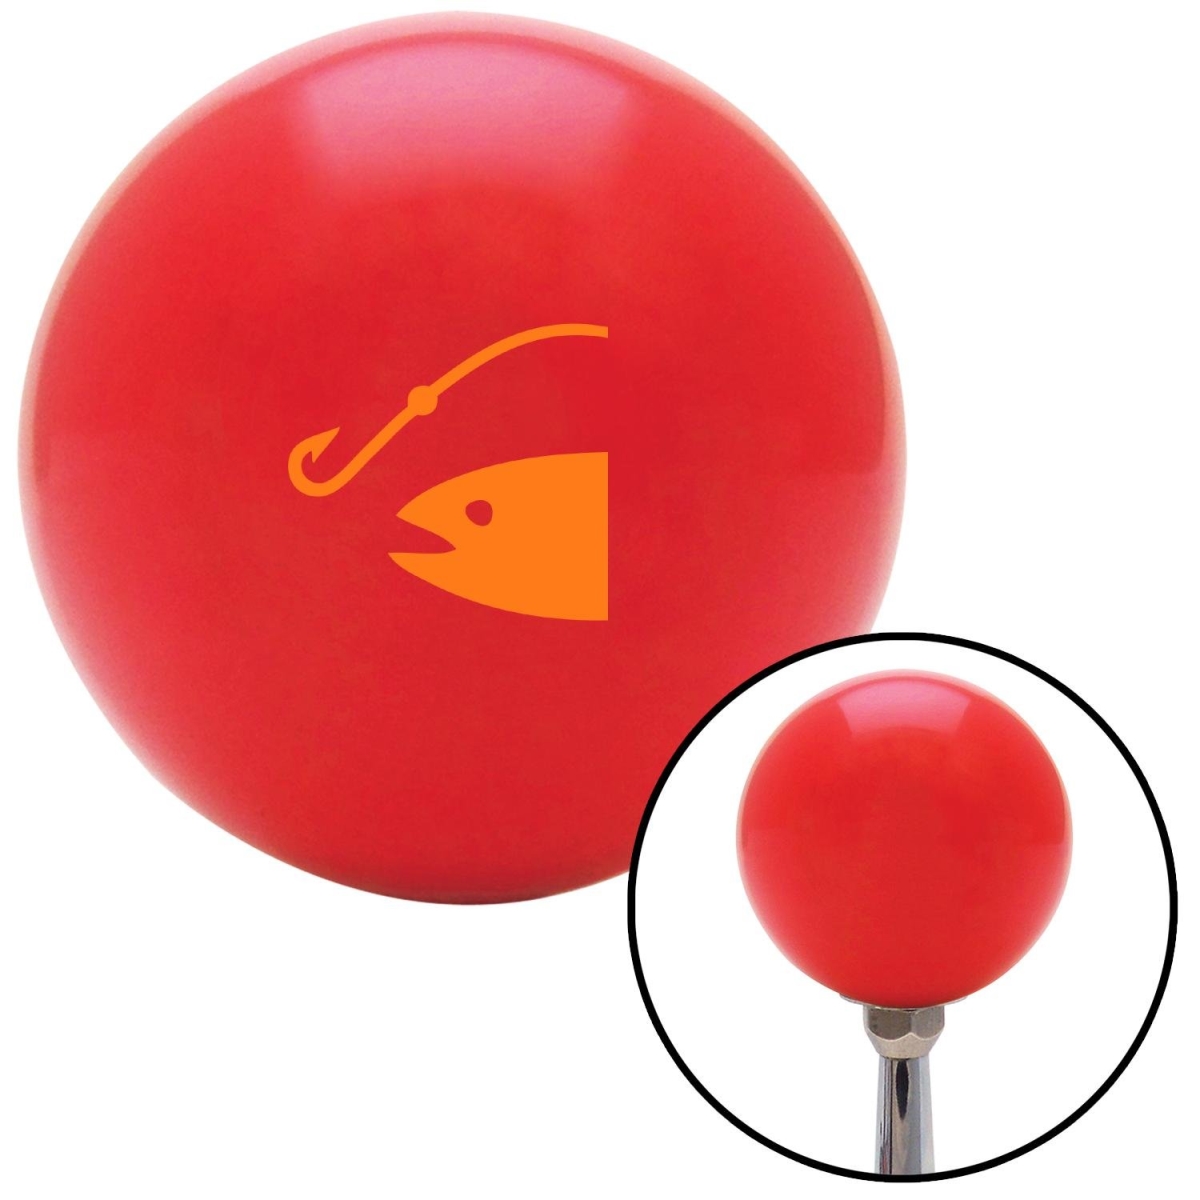 Picture of American Shifter 101468 Orange Fish & a Hook Red Shift Knob with M16 x 1.5 Insert Shifter Auto Manual